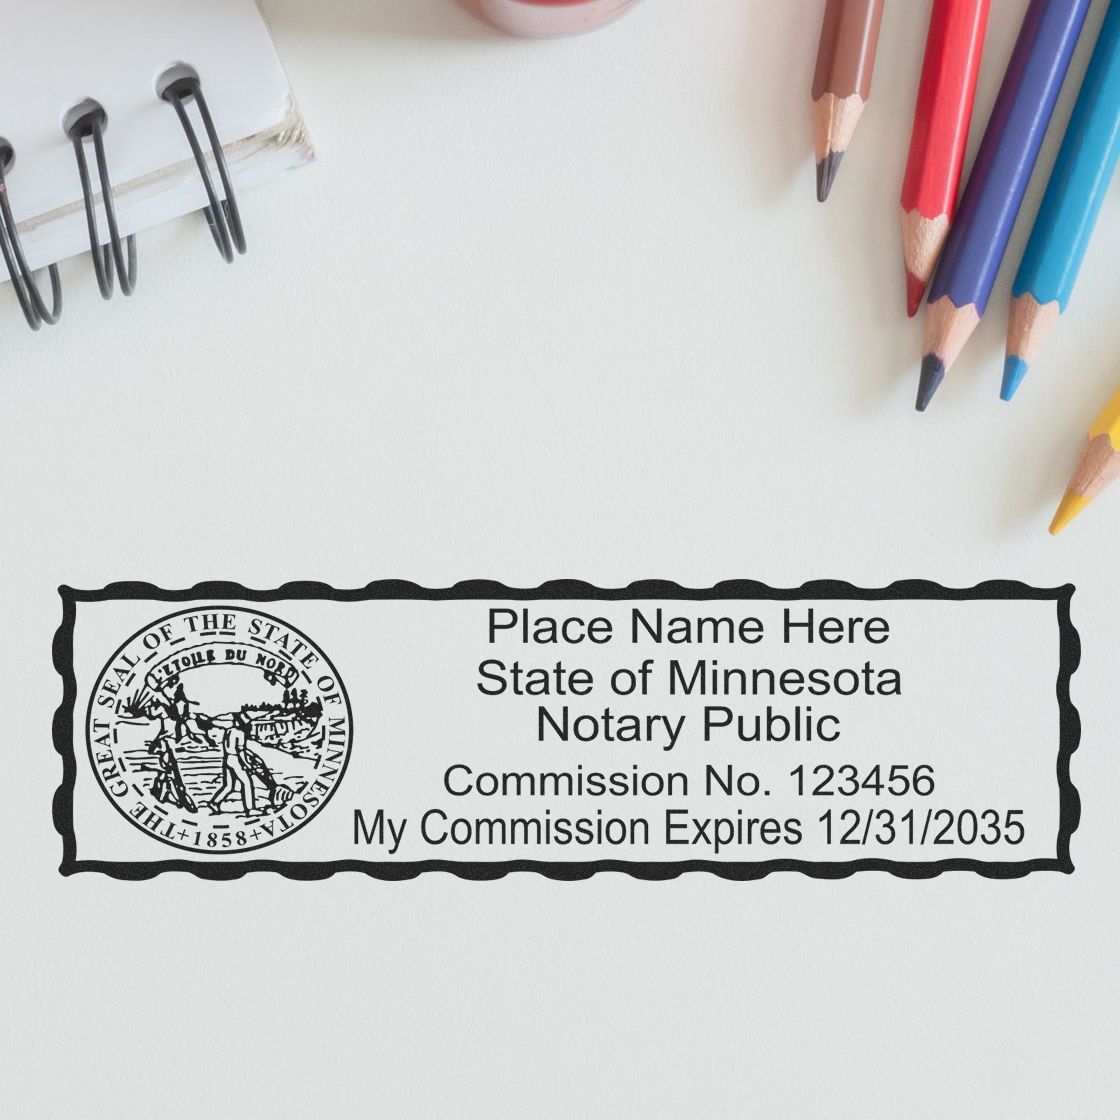 A stamped impression of the Slim Pre-Inked State Seal Notary Stamp for Minnesota in this stylish lifestyle photo, setting the tone for a unique and personalized product.